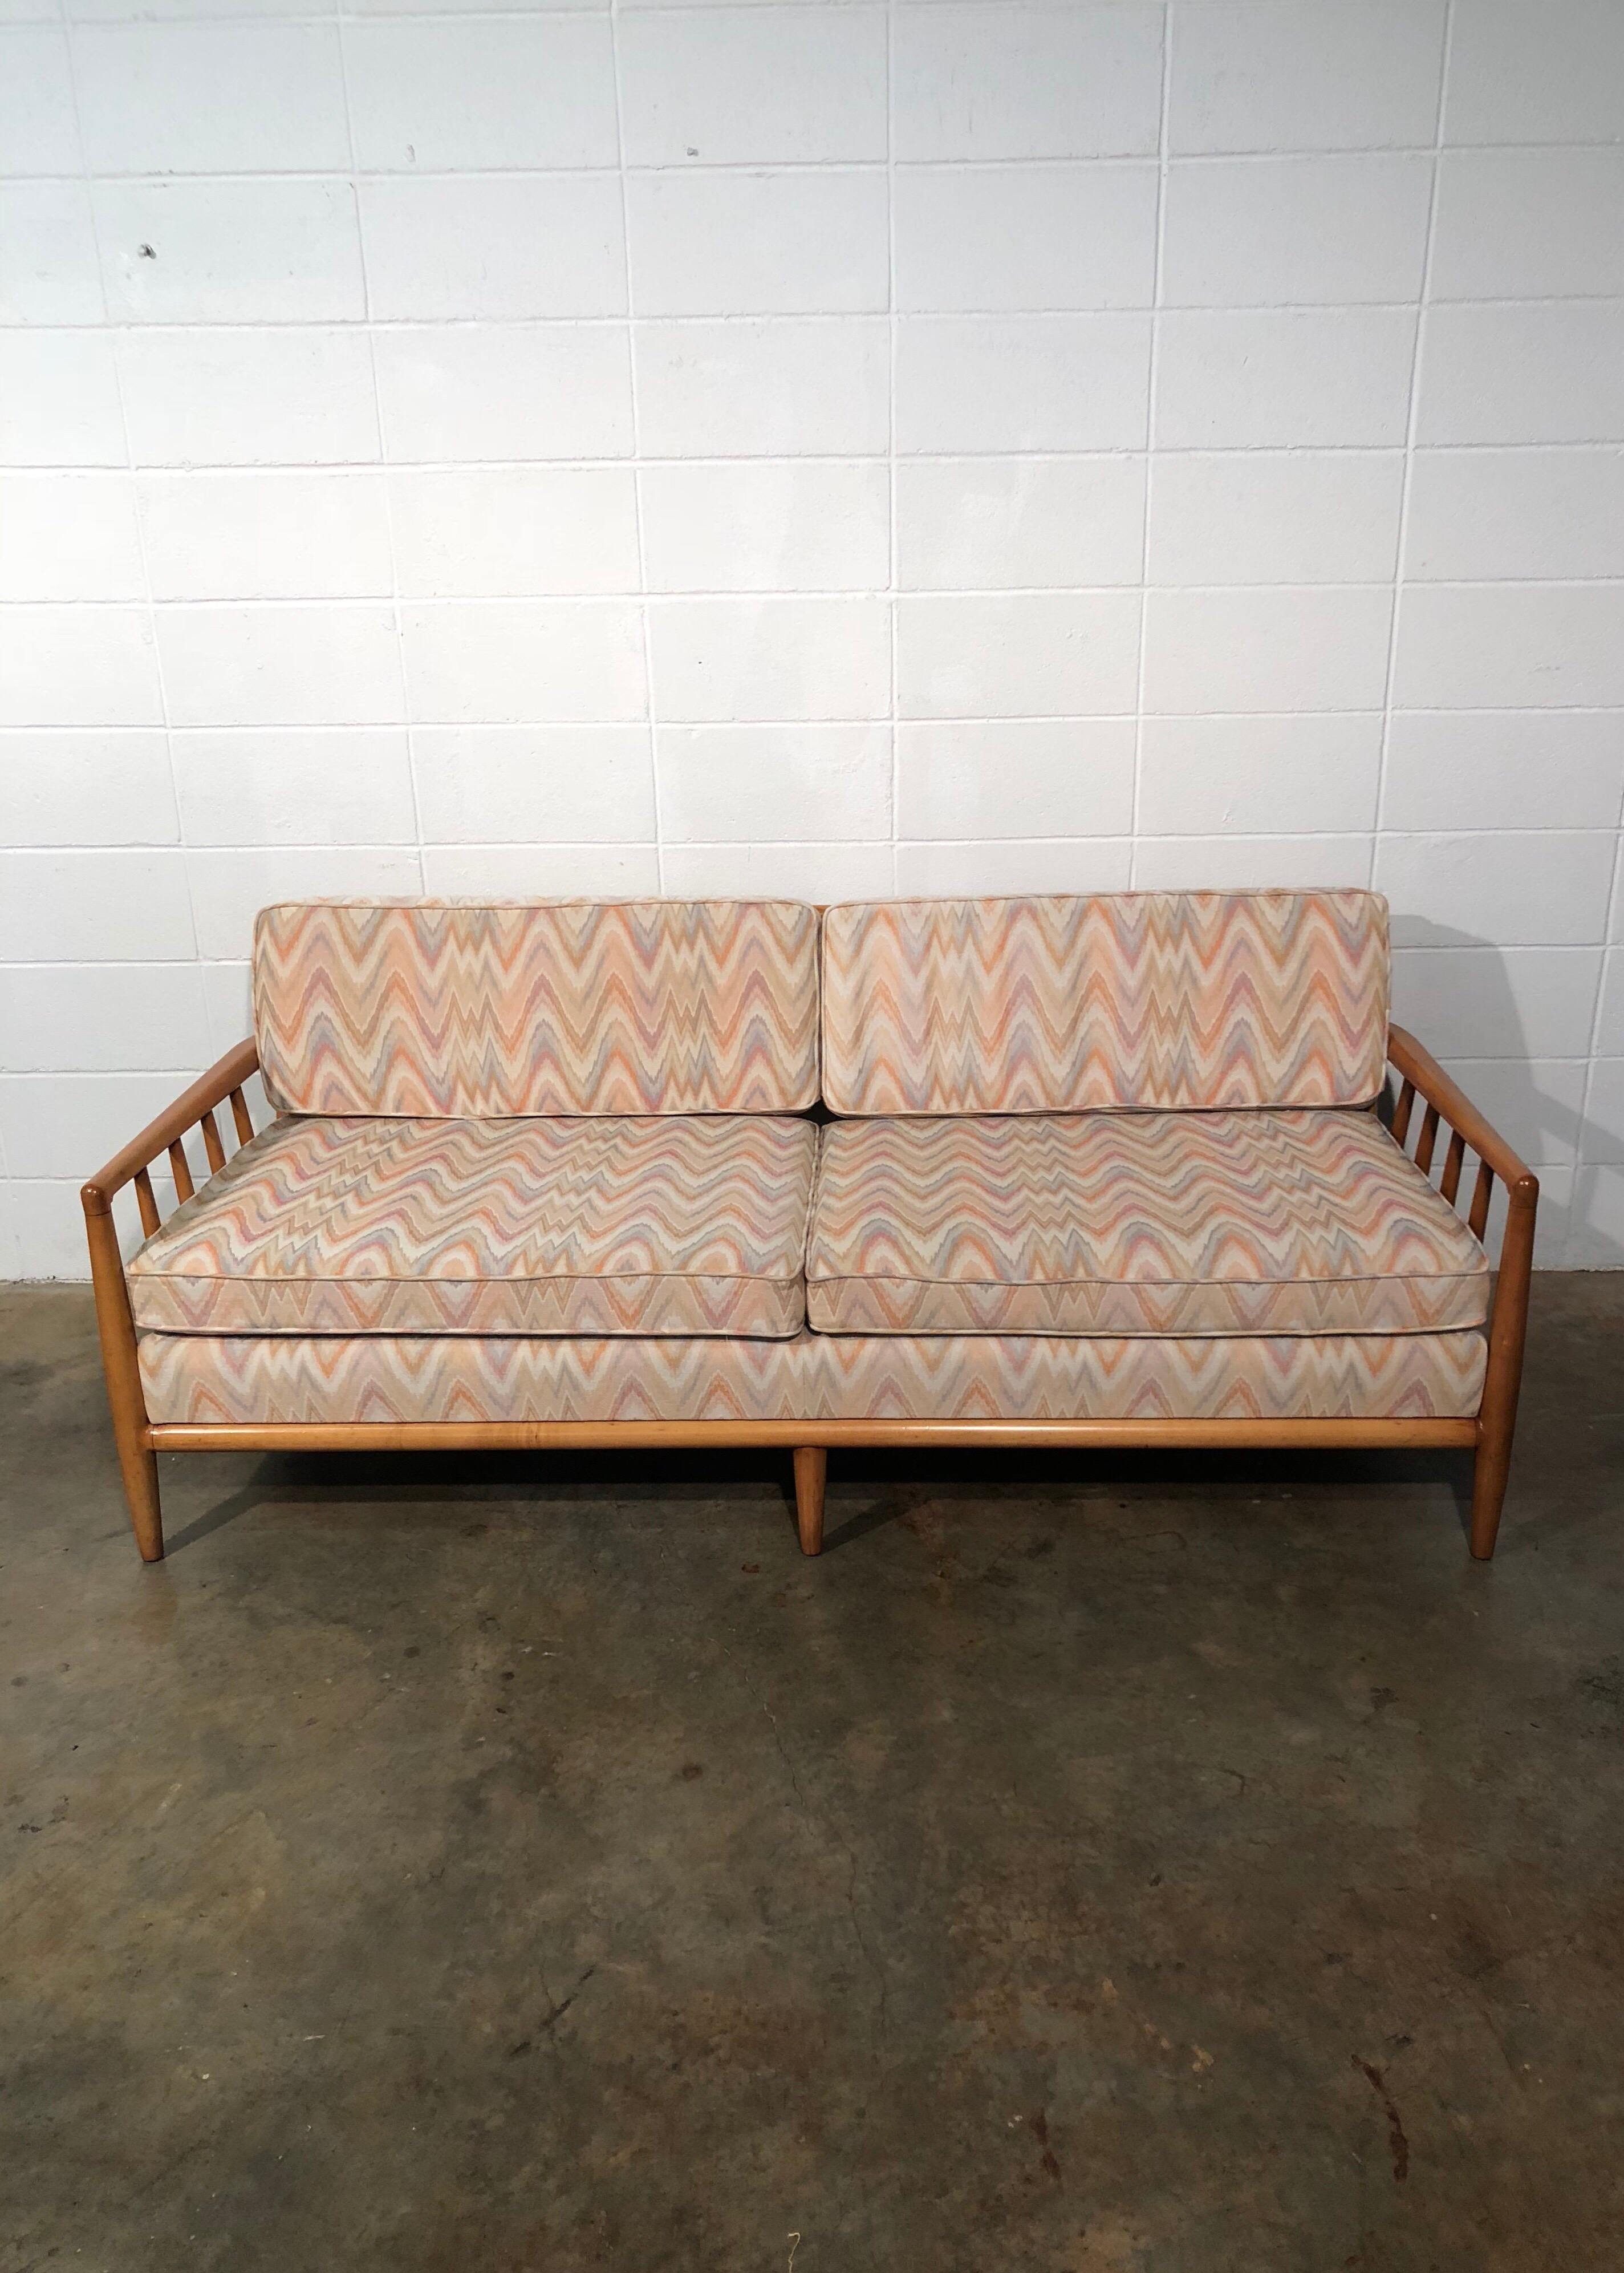 Mid-Century Modern spindled sofa in vintage flame stitch fabric. The sofa is in great original condition. It has been thoroughly cleaned and has no structural issues. Retains vintage upholstery in excellent condition. No known defects that would